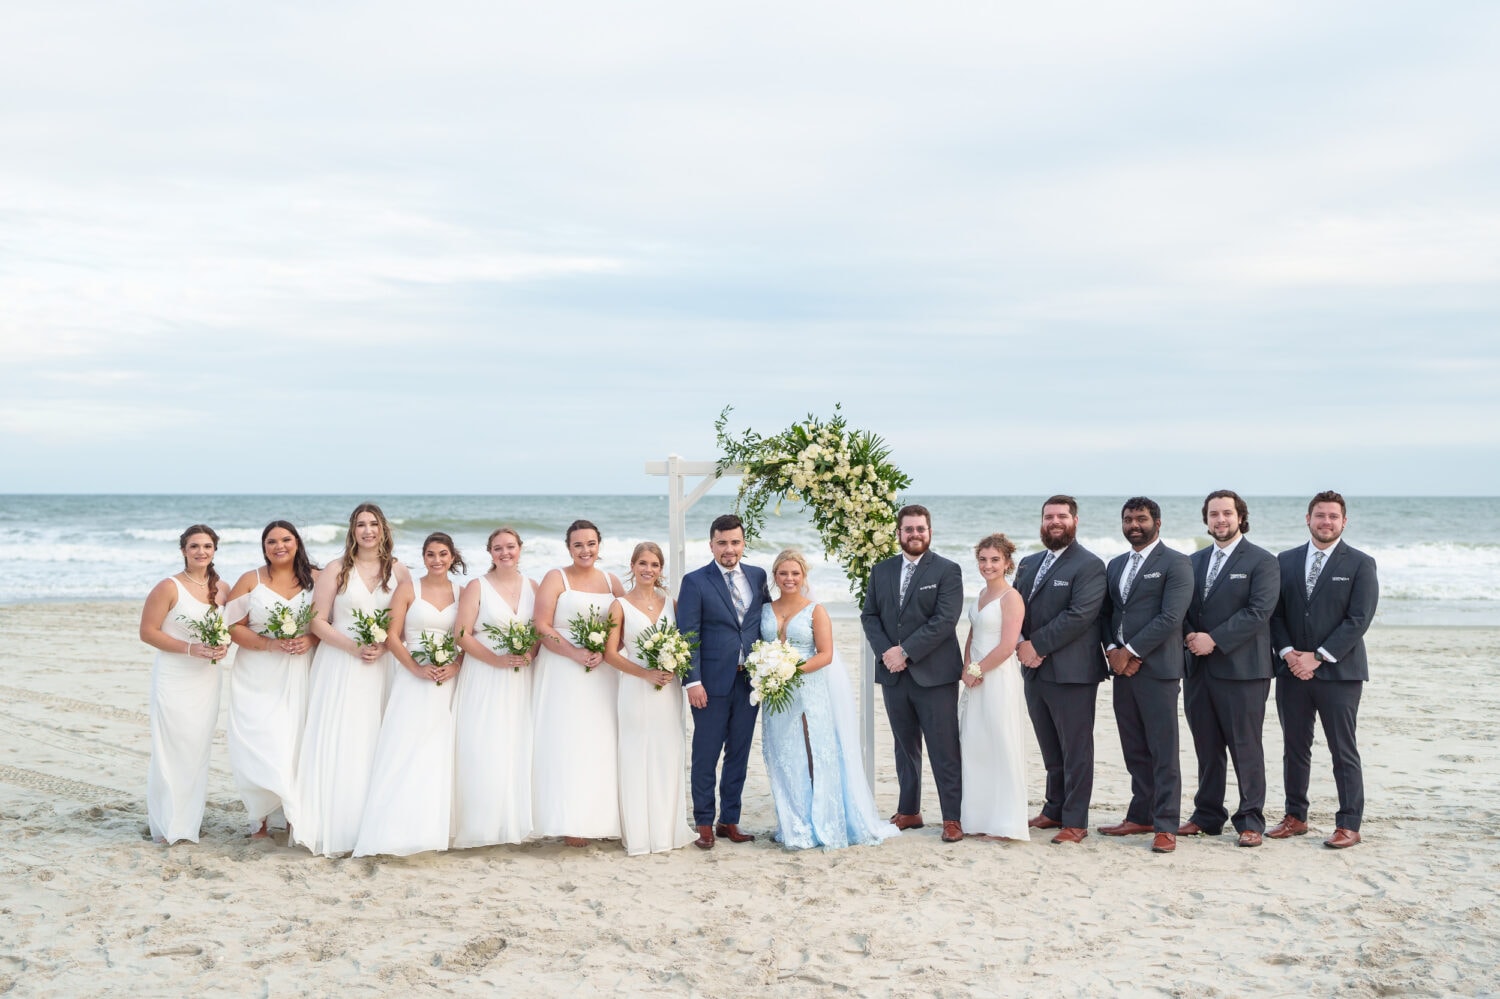 Bridal party pictures after the ceremony - Hilton Myrtle Beach Resort